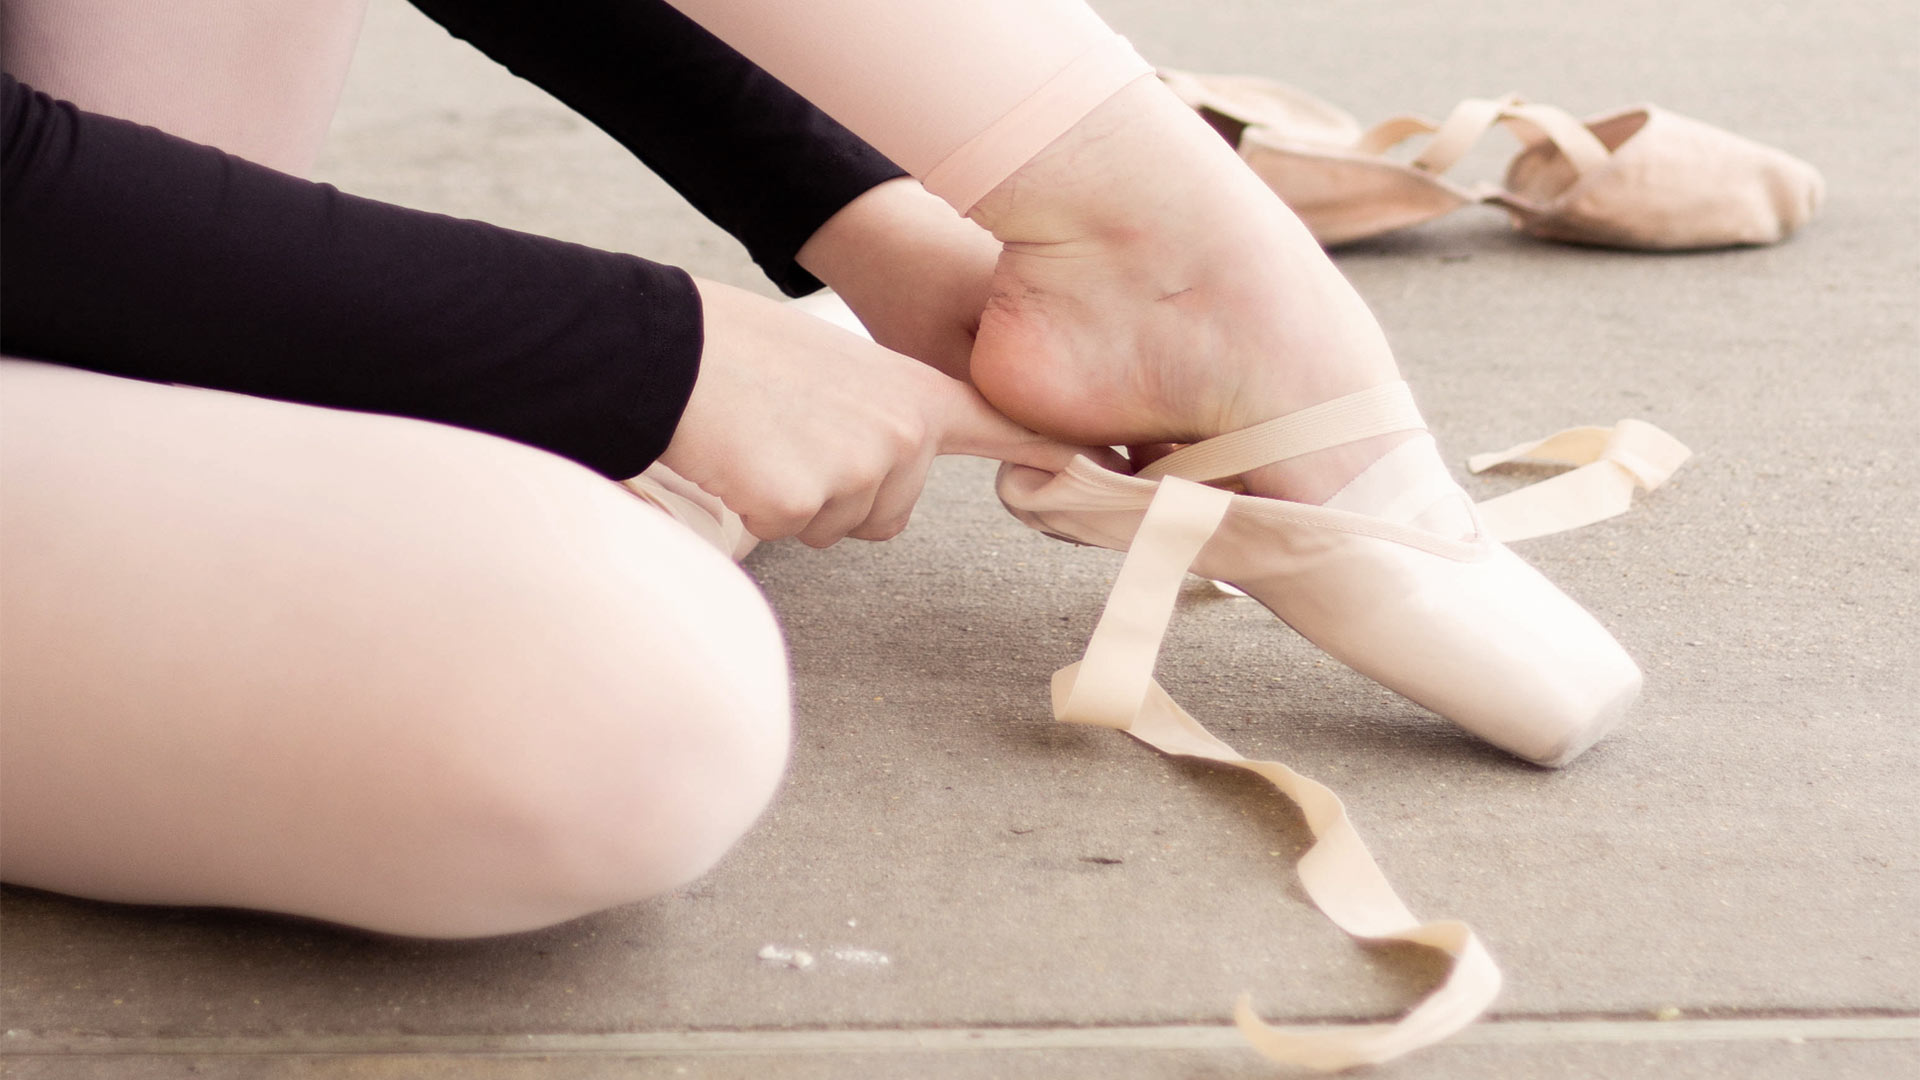 A ballet dancer putting on their shoes and preparing to perform